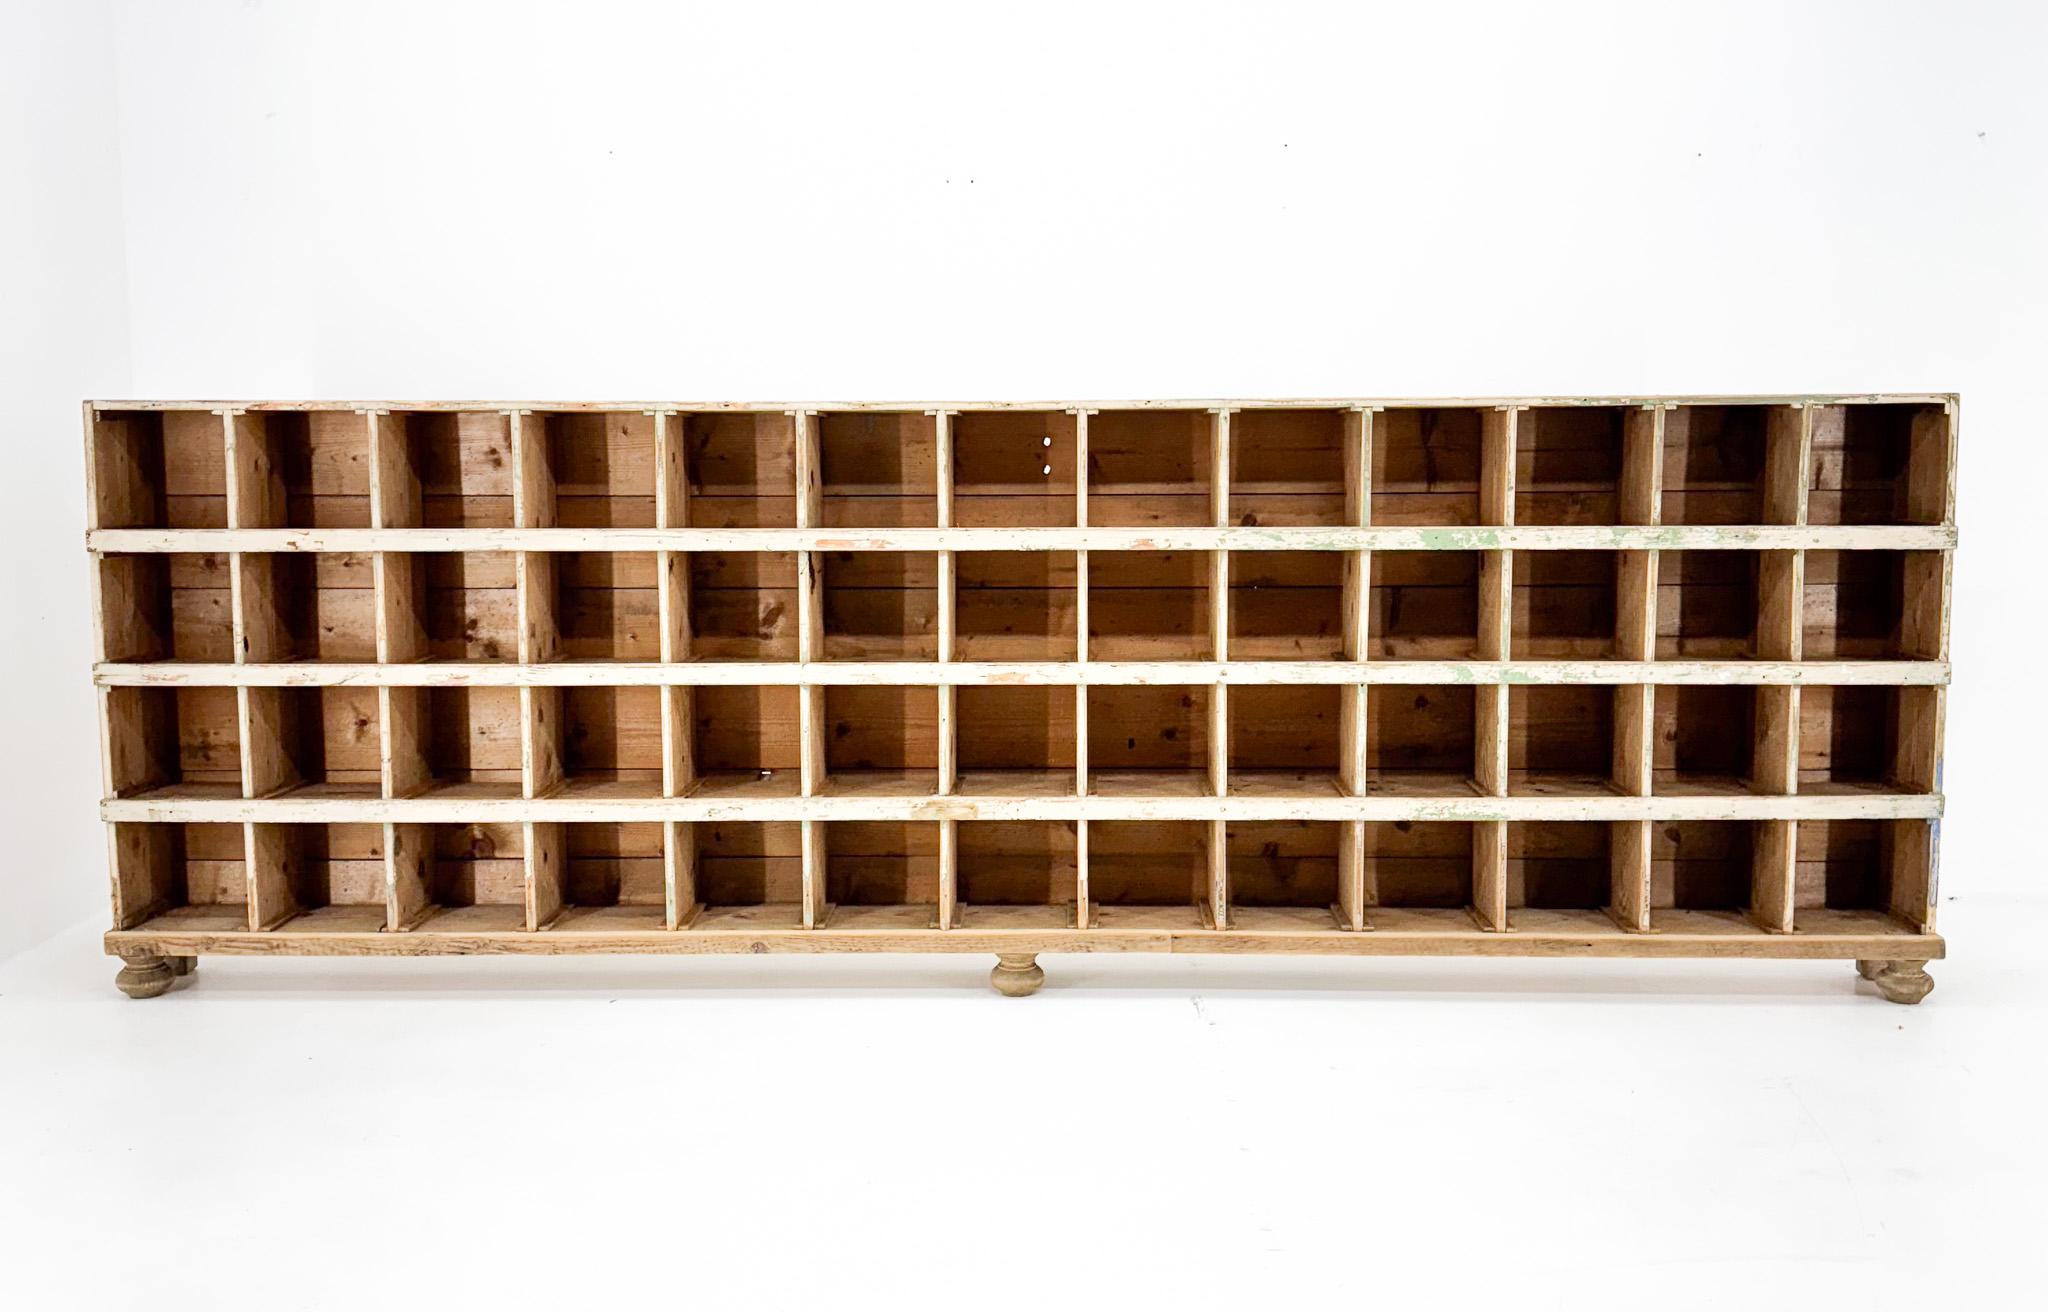 Unique wooden long cabinet with 52 compartments. Original condition, new front legs. The internal dimensions of each compartment are 21 x 20 cm.